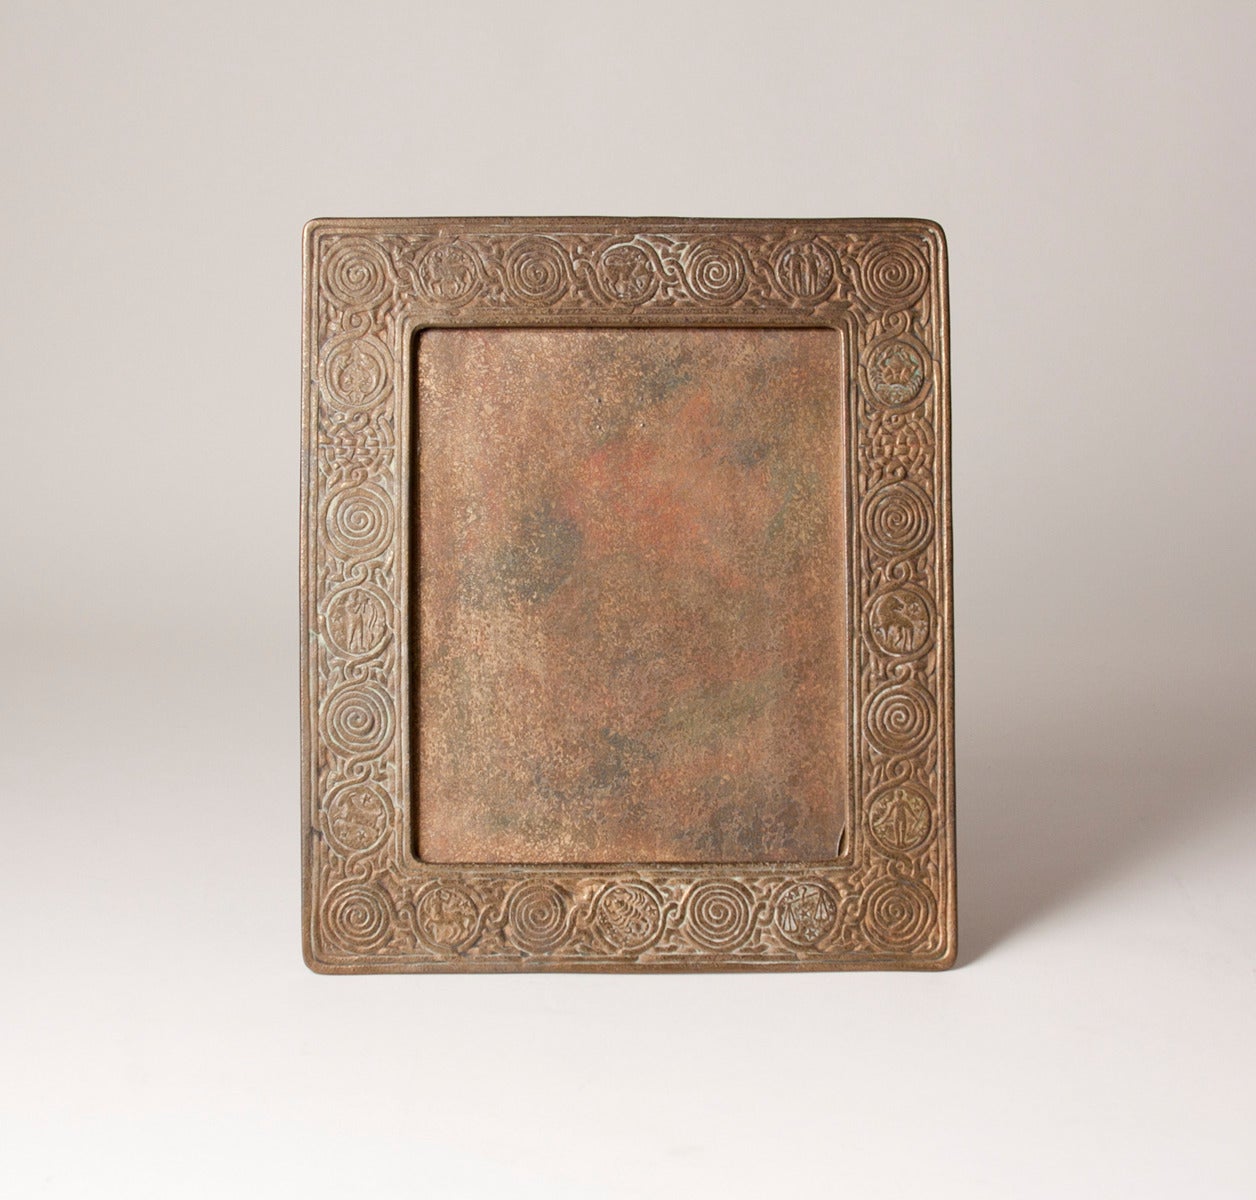 A Tiffany Studios 'Zodiac' Picture frame in original gold doré finish with traces of the original polychrome.   The frame will display an 8x10